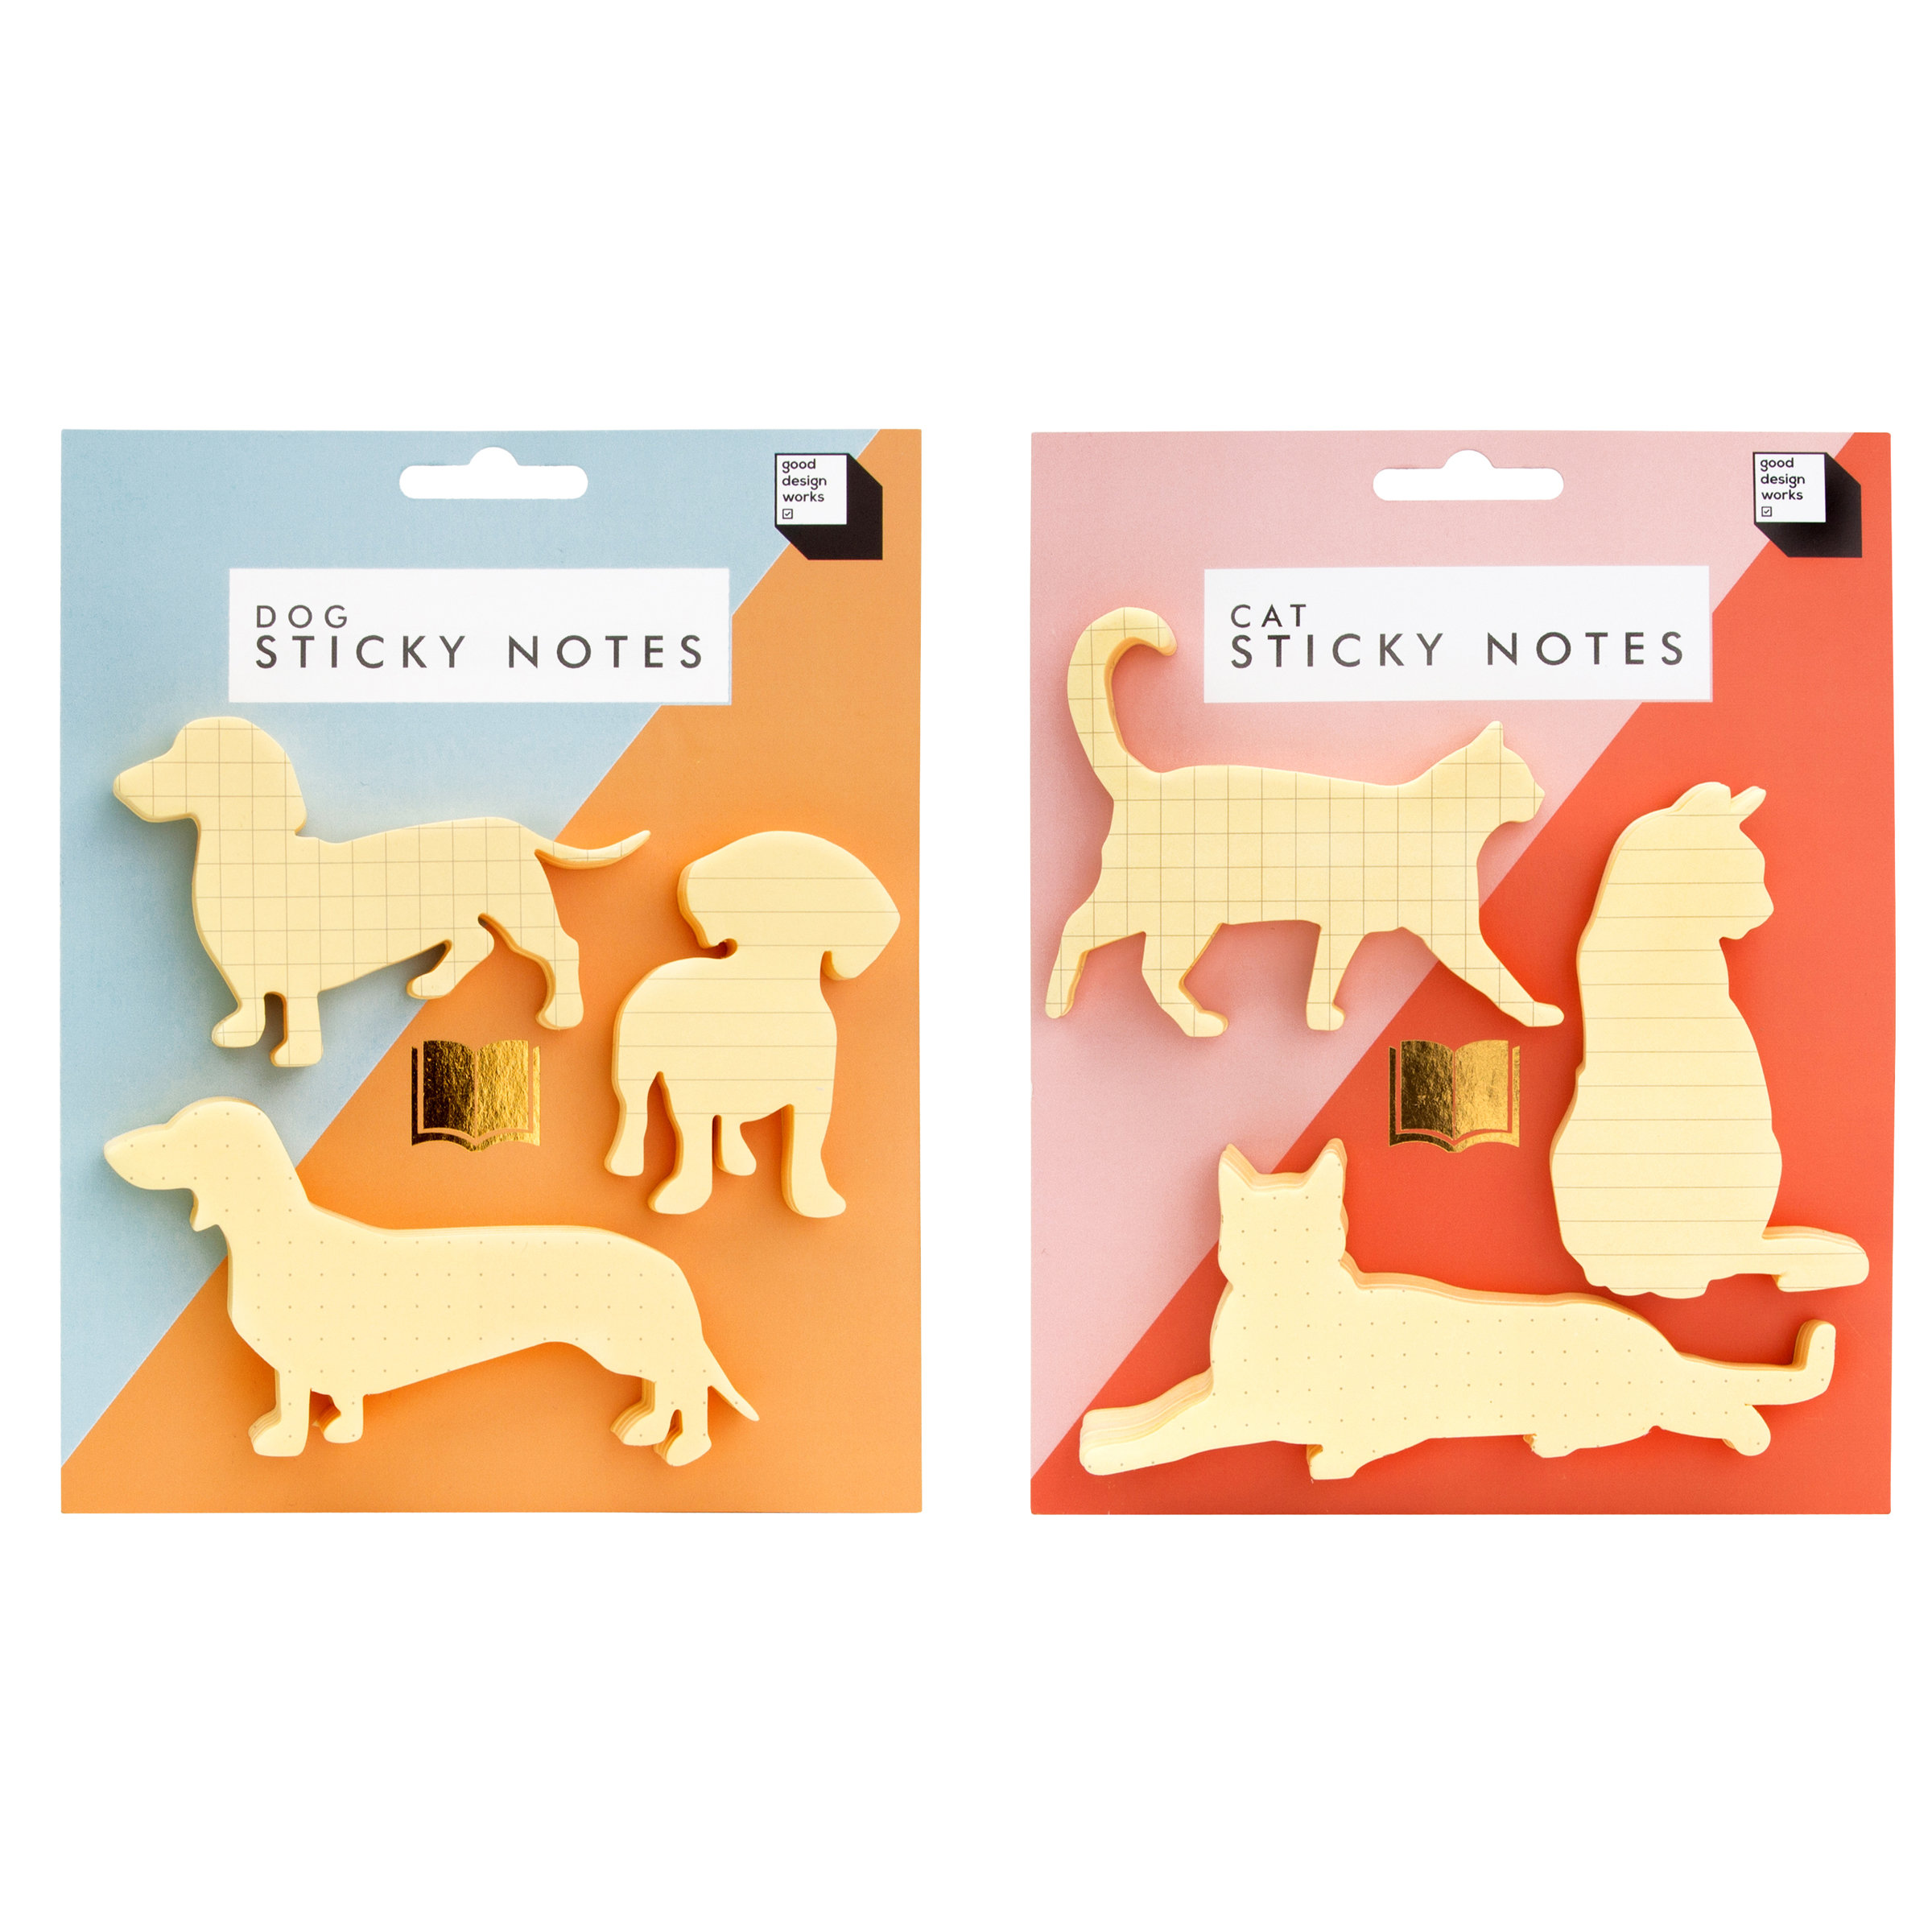 Cat and Dog Sticky Note Packs